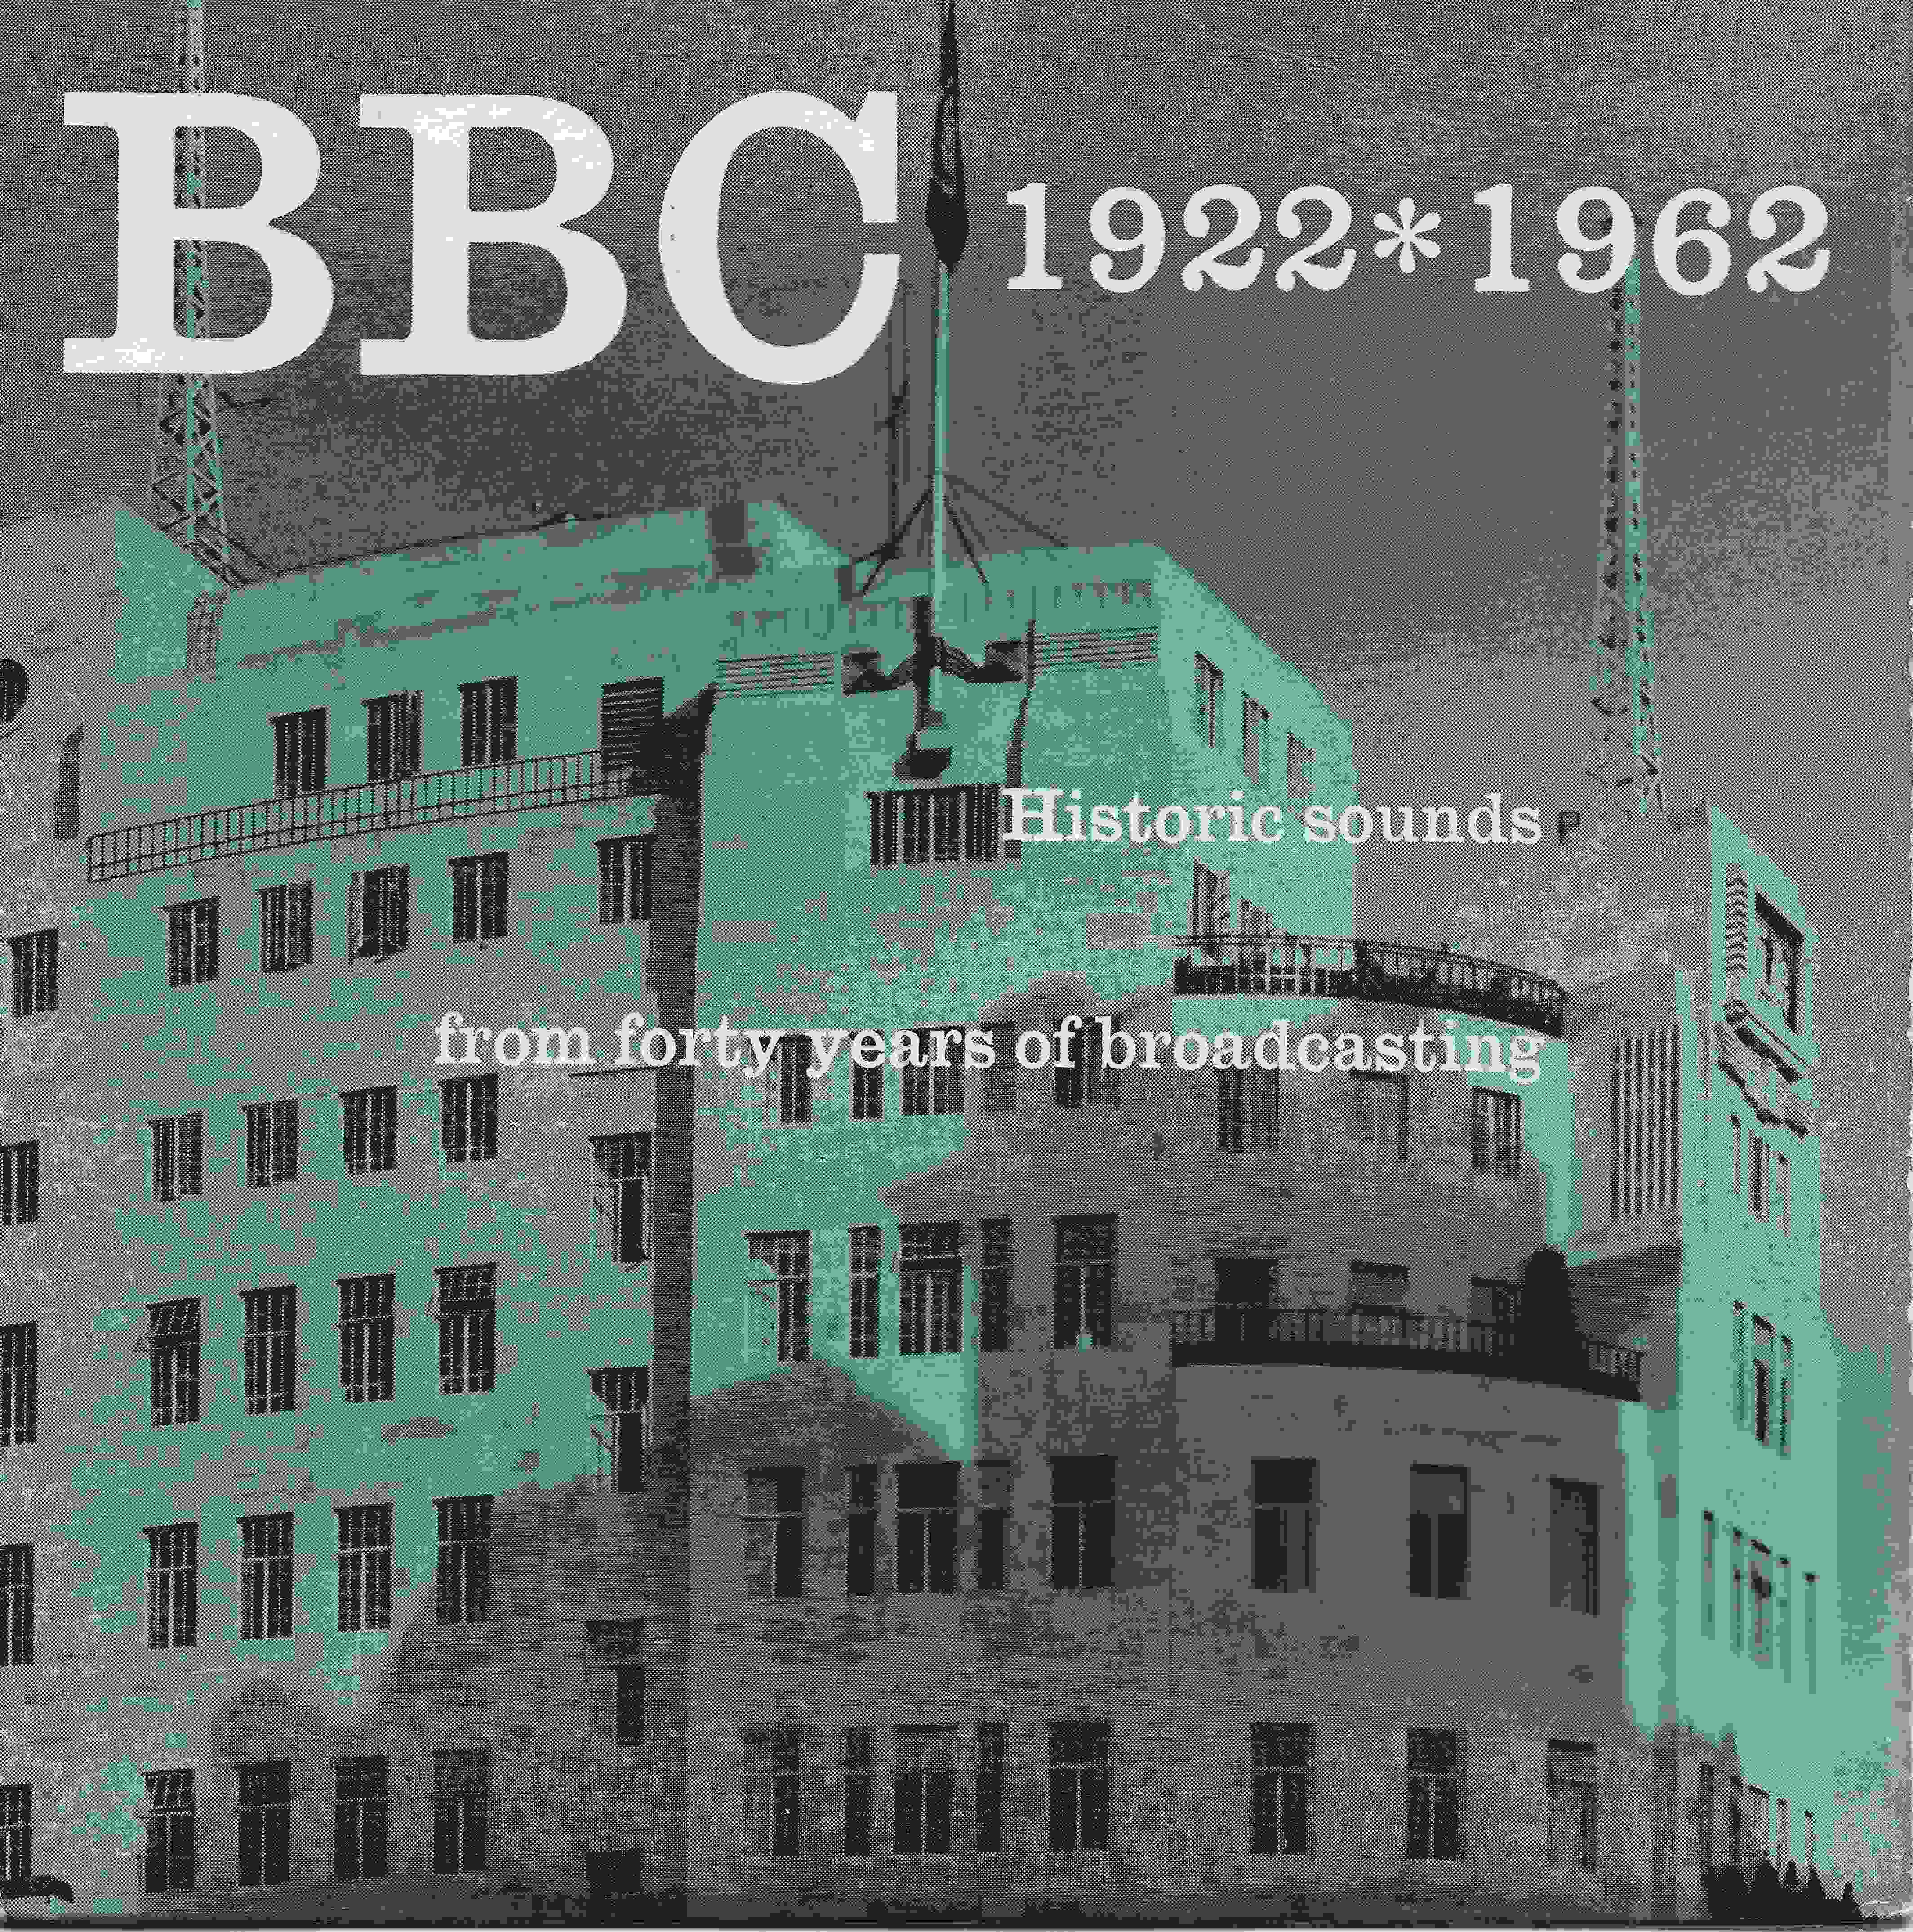 Picture of PD 1 BBC 1922*1962 - Historic sounds from forty years of broadcasting by artist Various from the BBC records and Tapes library